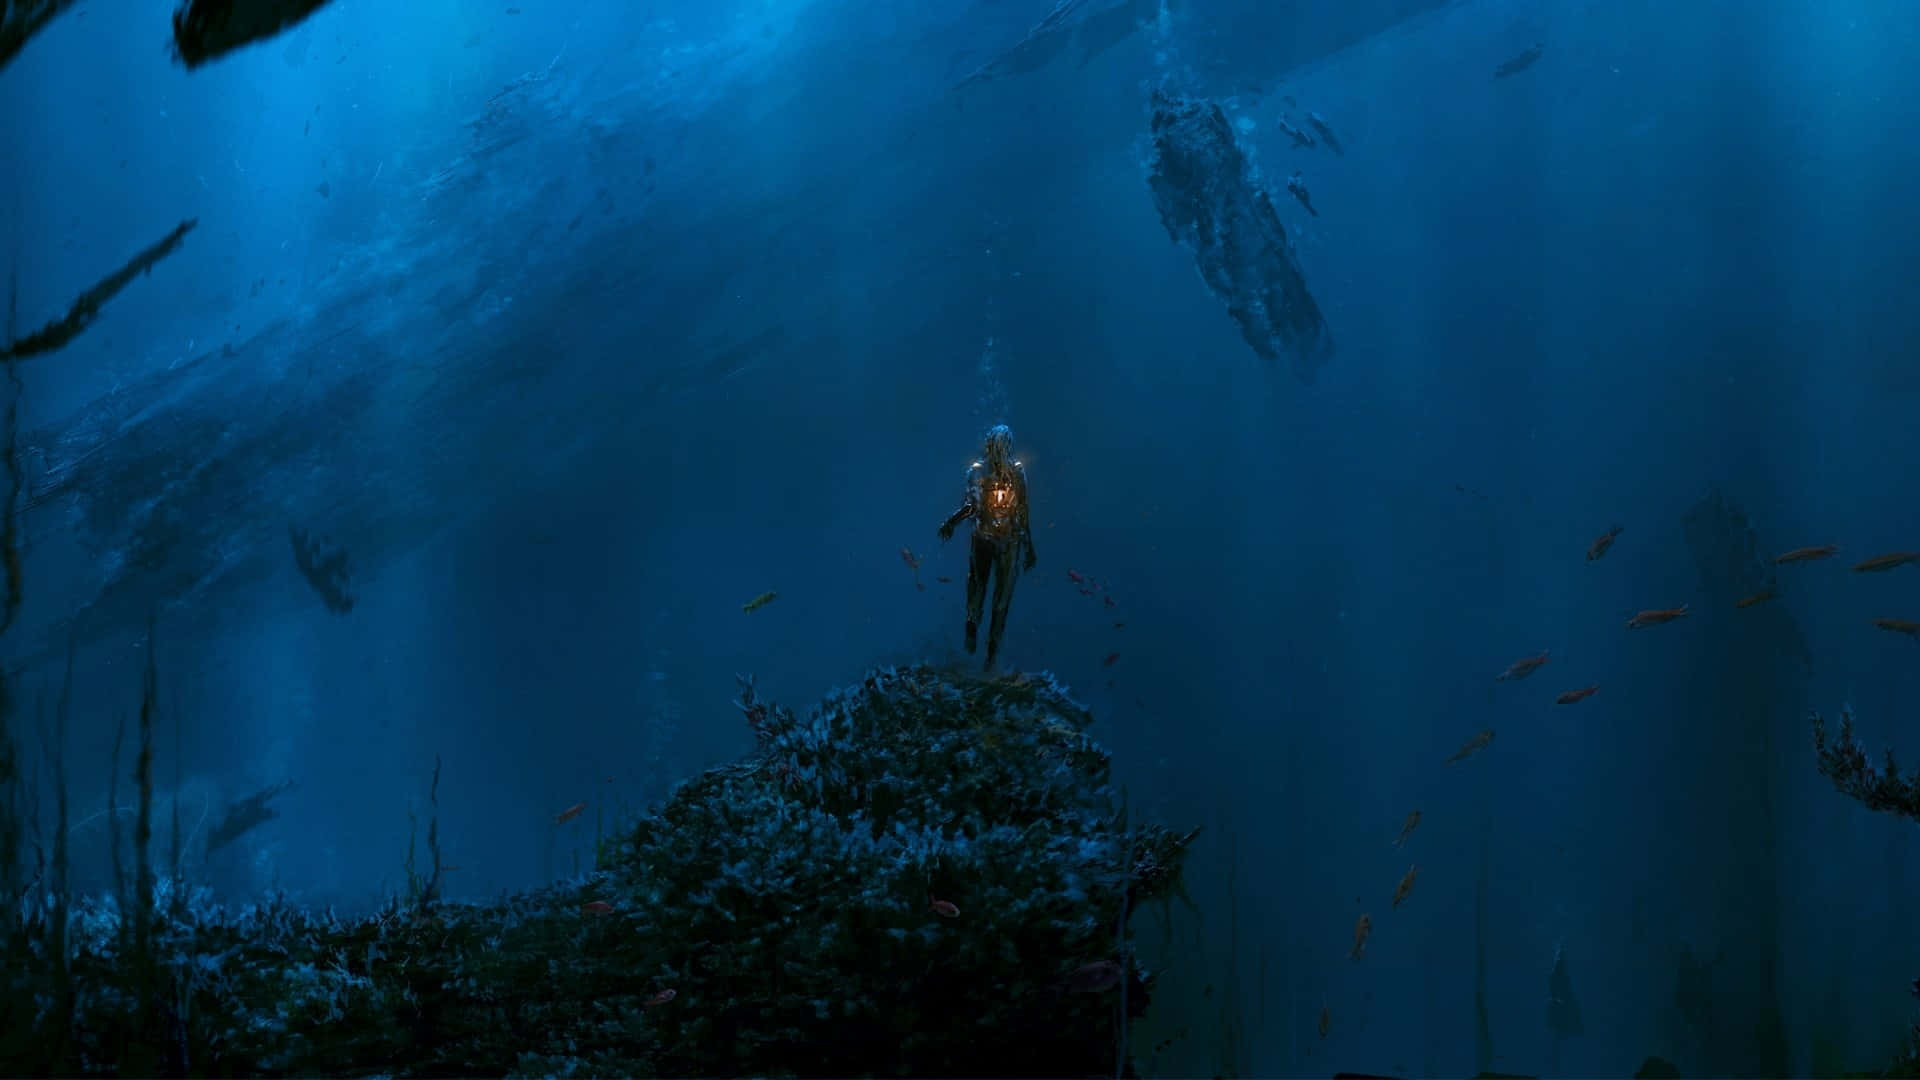 "Explore the mysterious and eerie depths of the ocean."